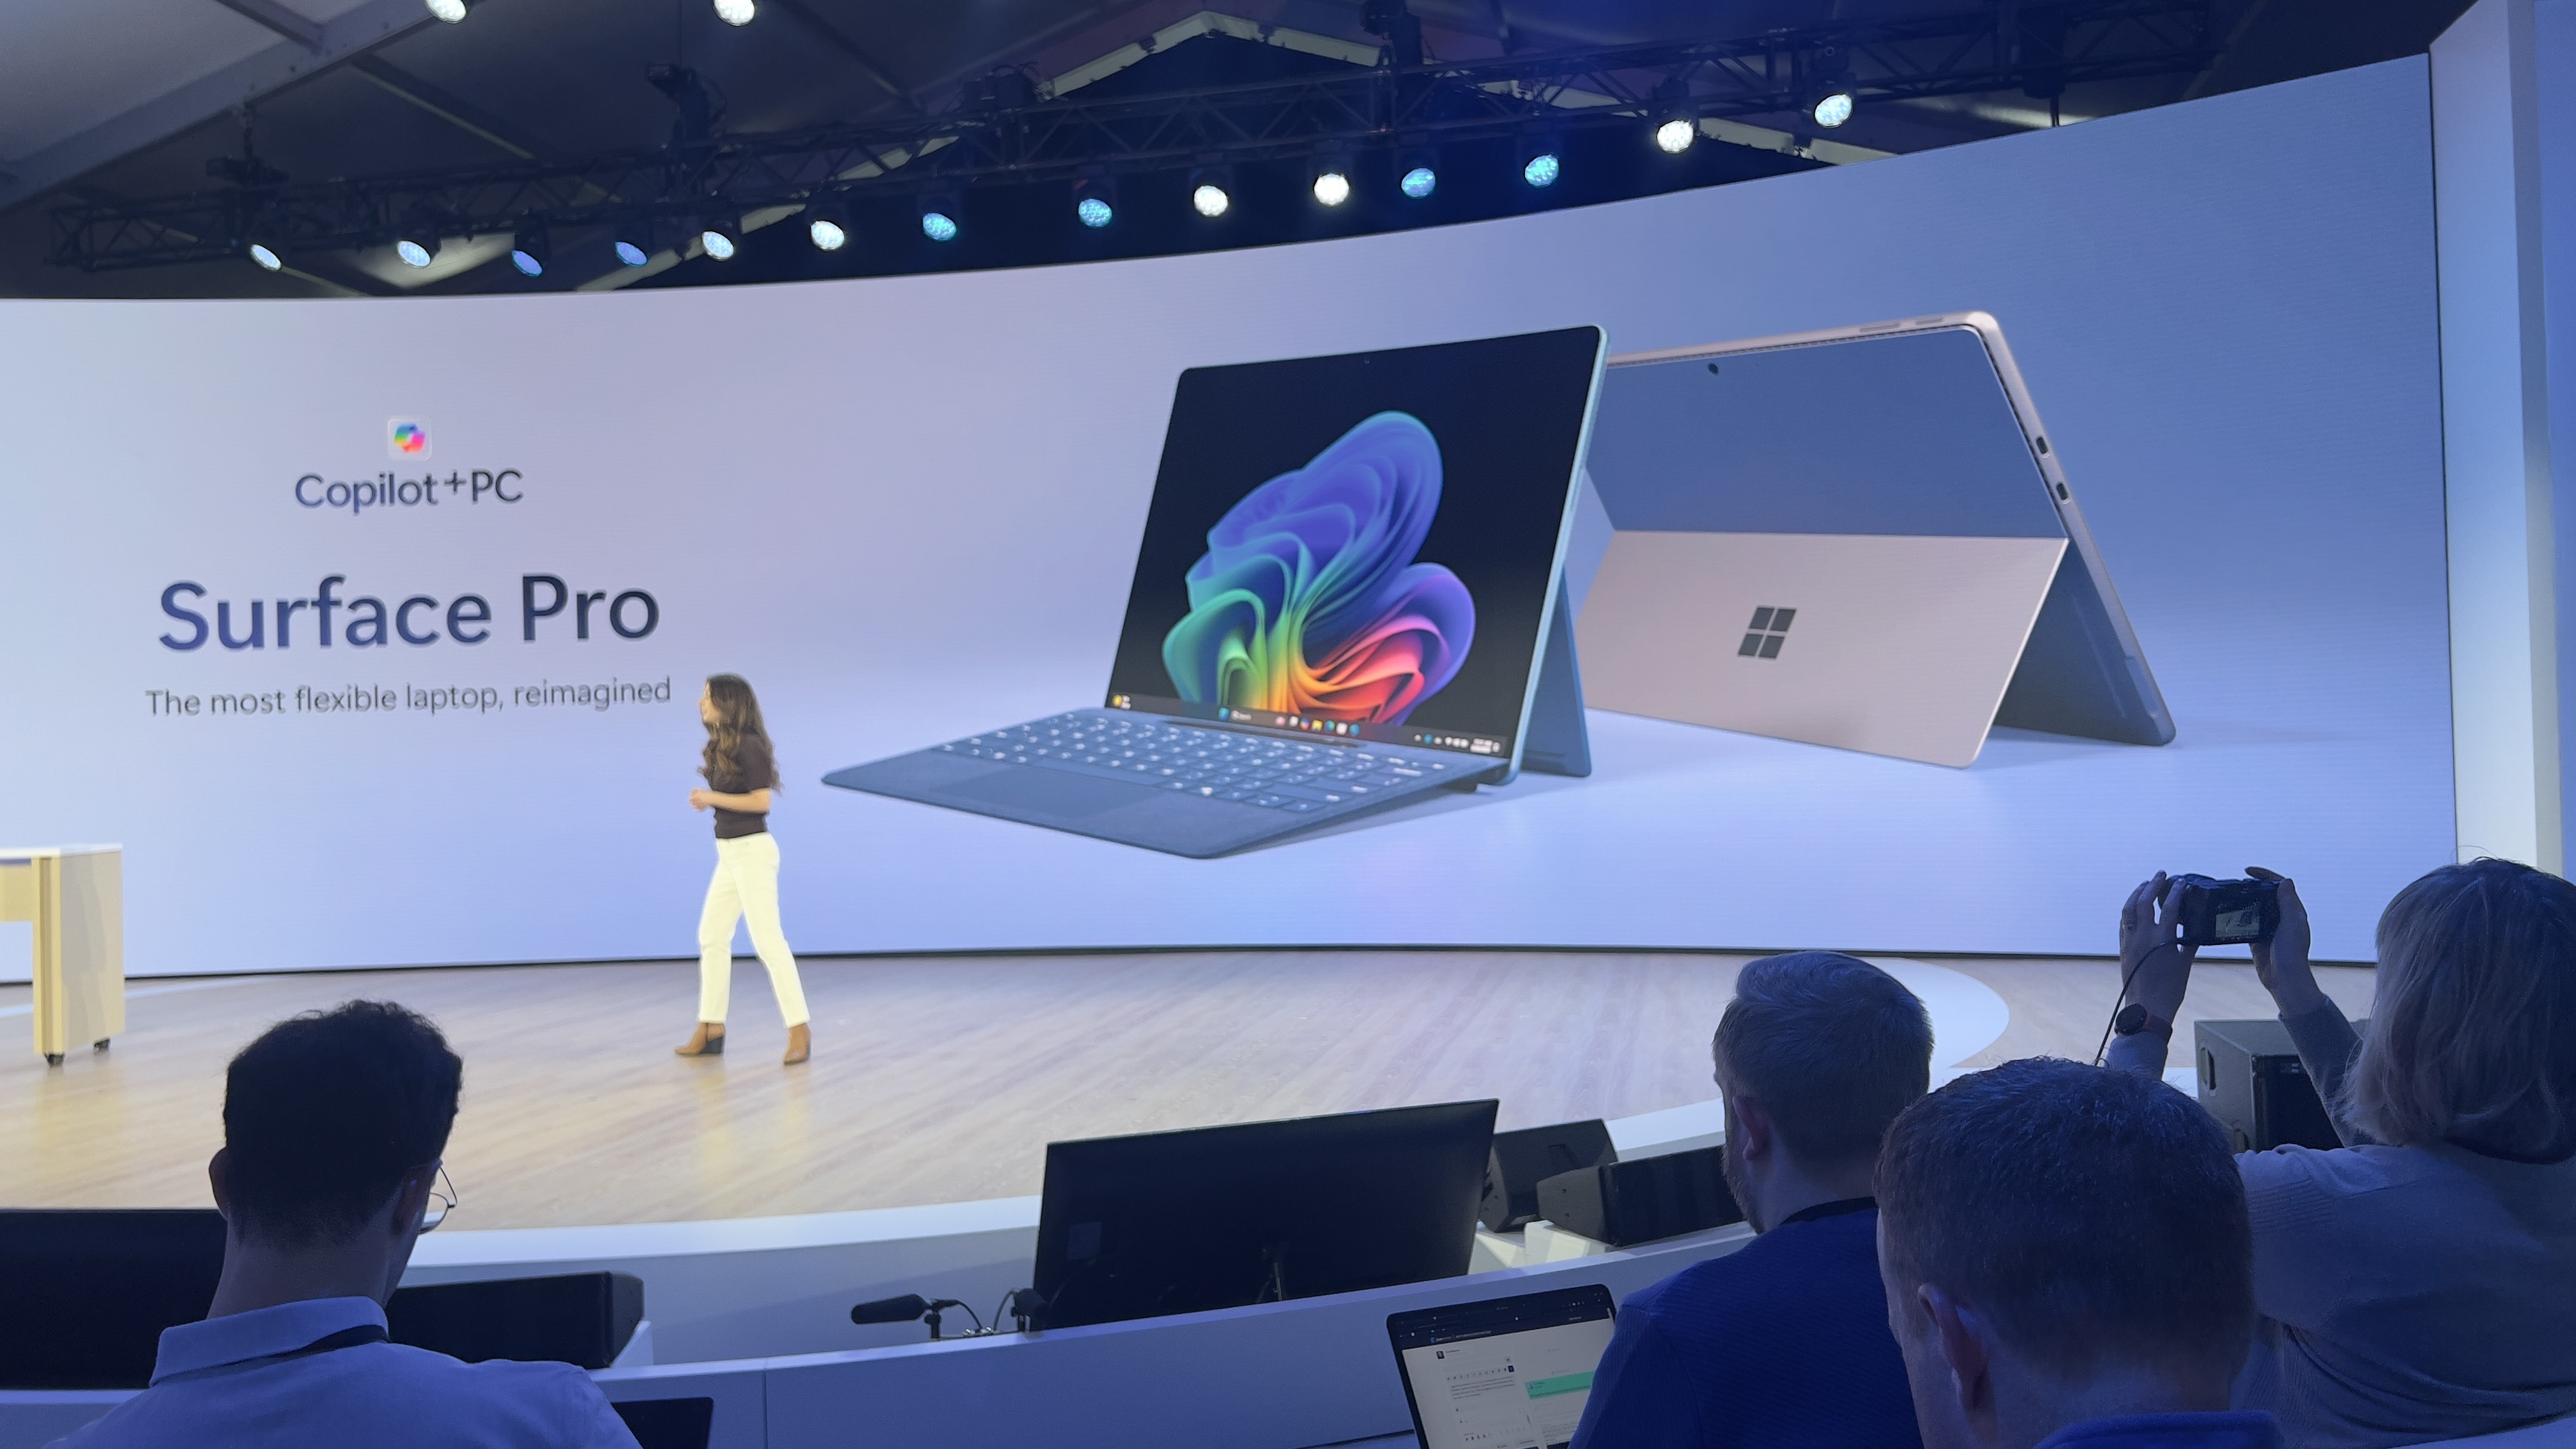 A shot from Microsoft's AI Era live event, showing the new Surface Pro tablet.